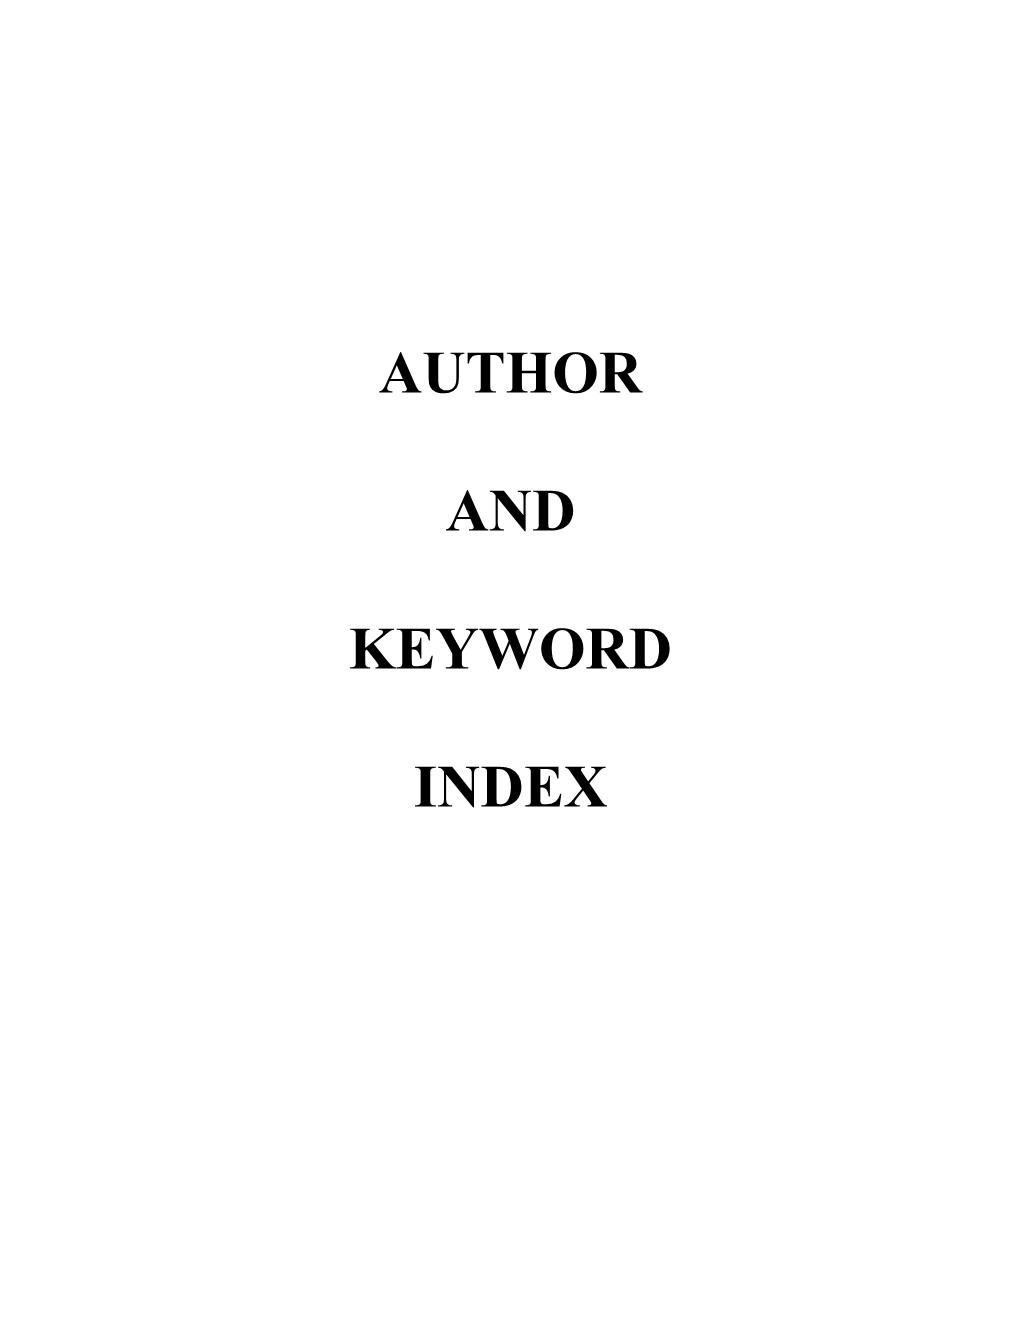 Author and Keyword Index